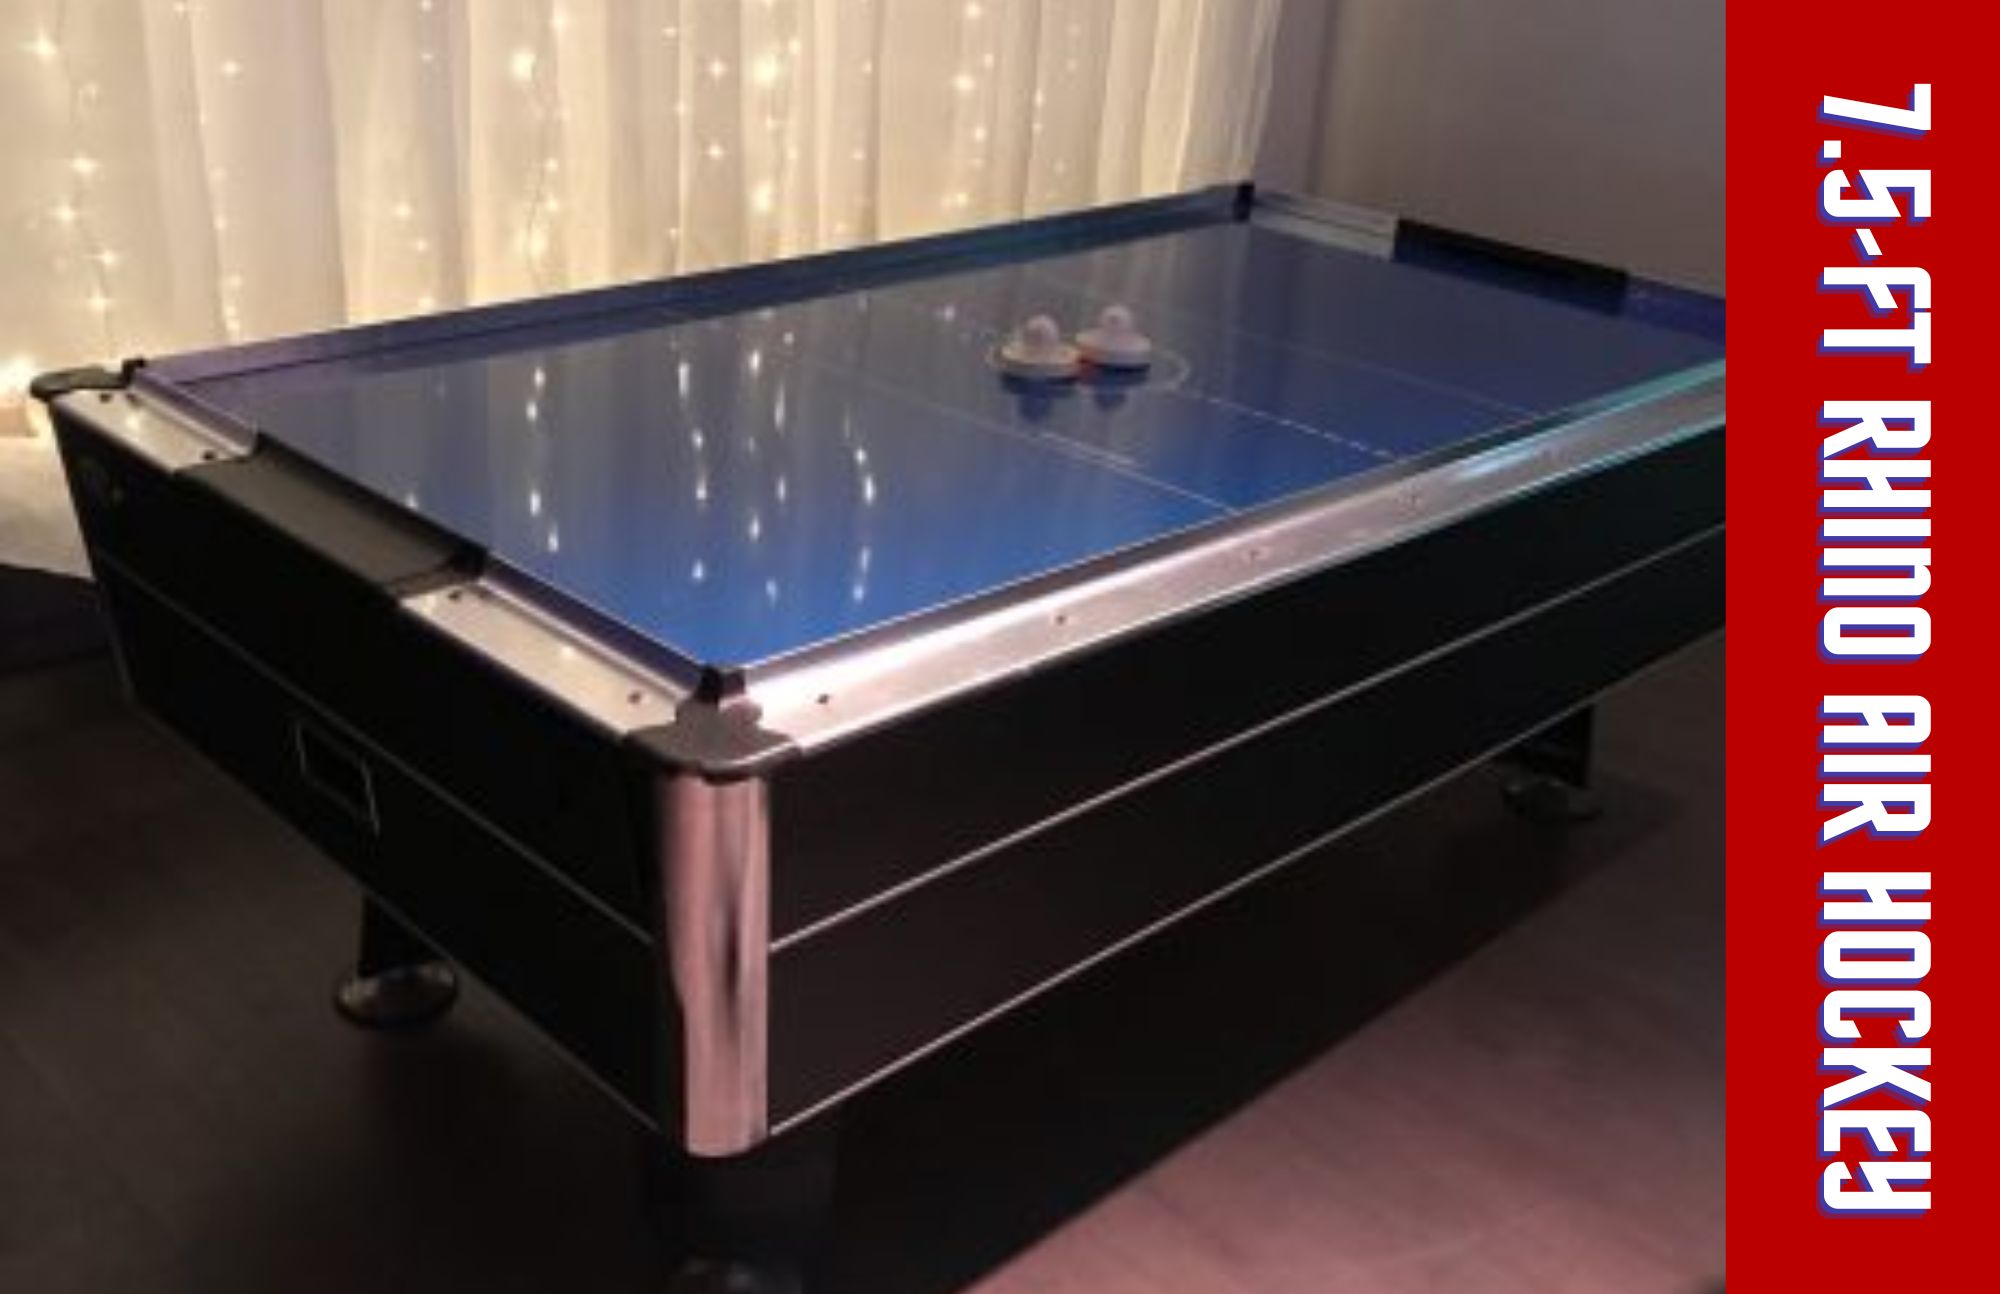 The 7.5-ft rhino air hockey table has a blue glossy table surface and a pair of white pushers